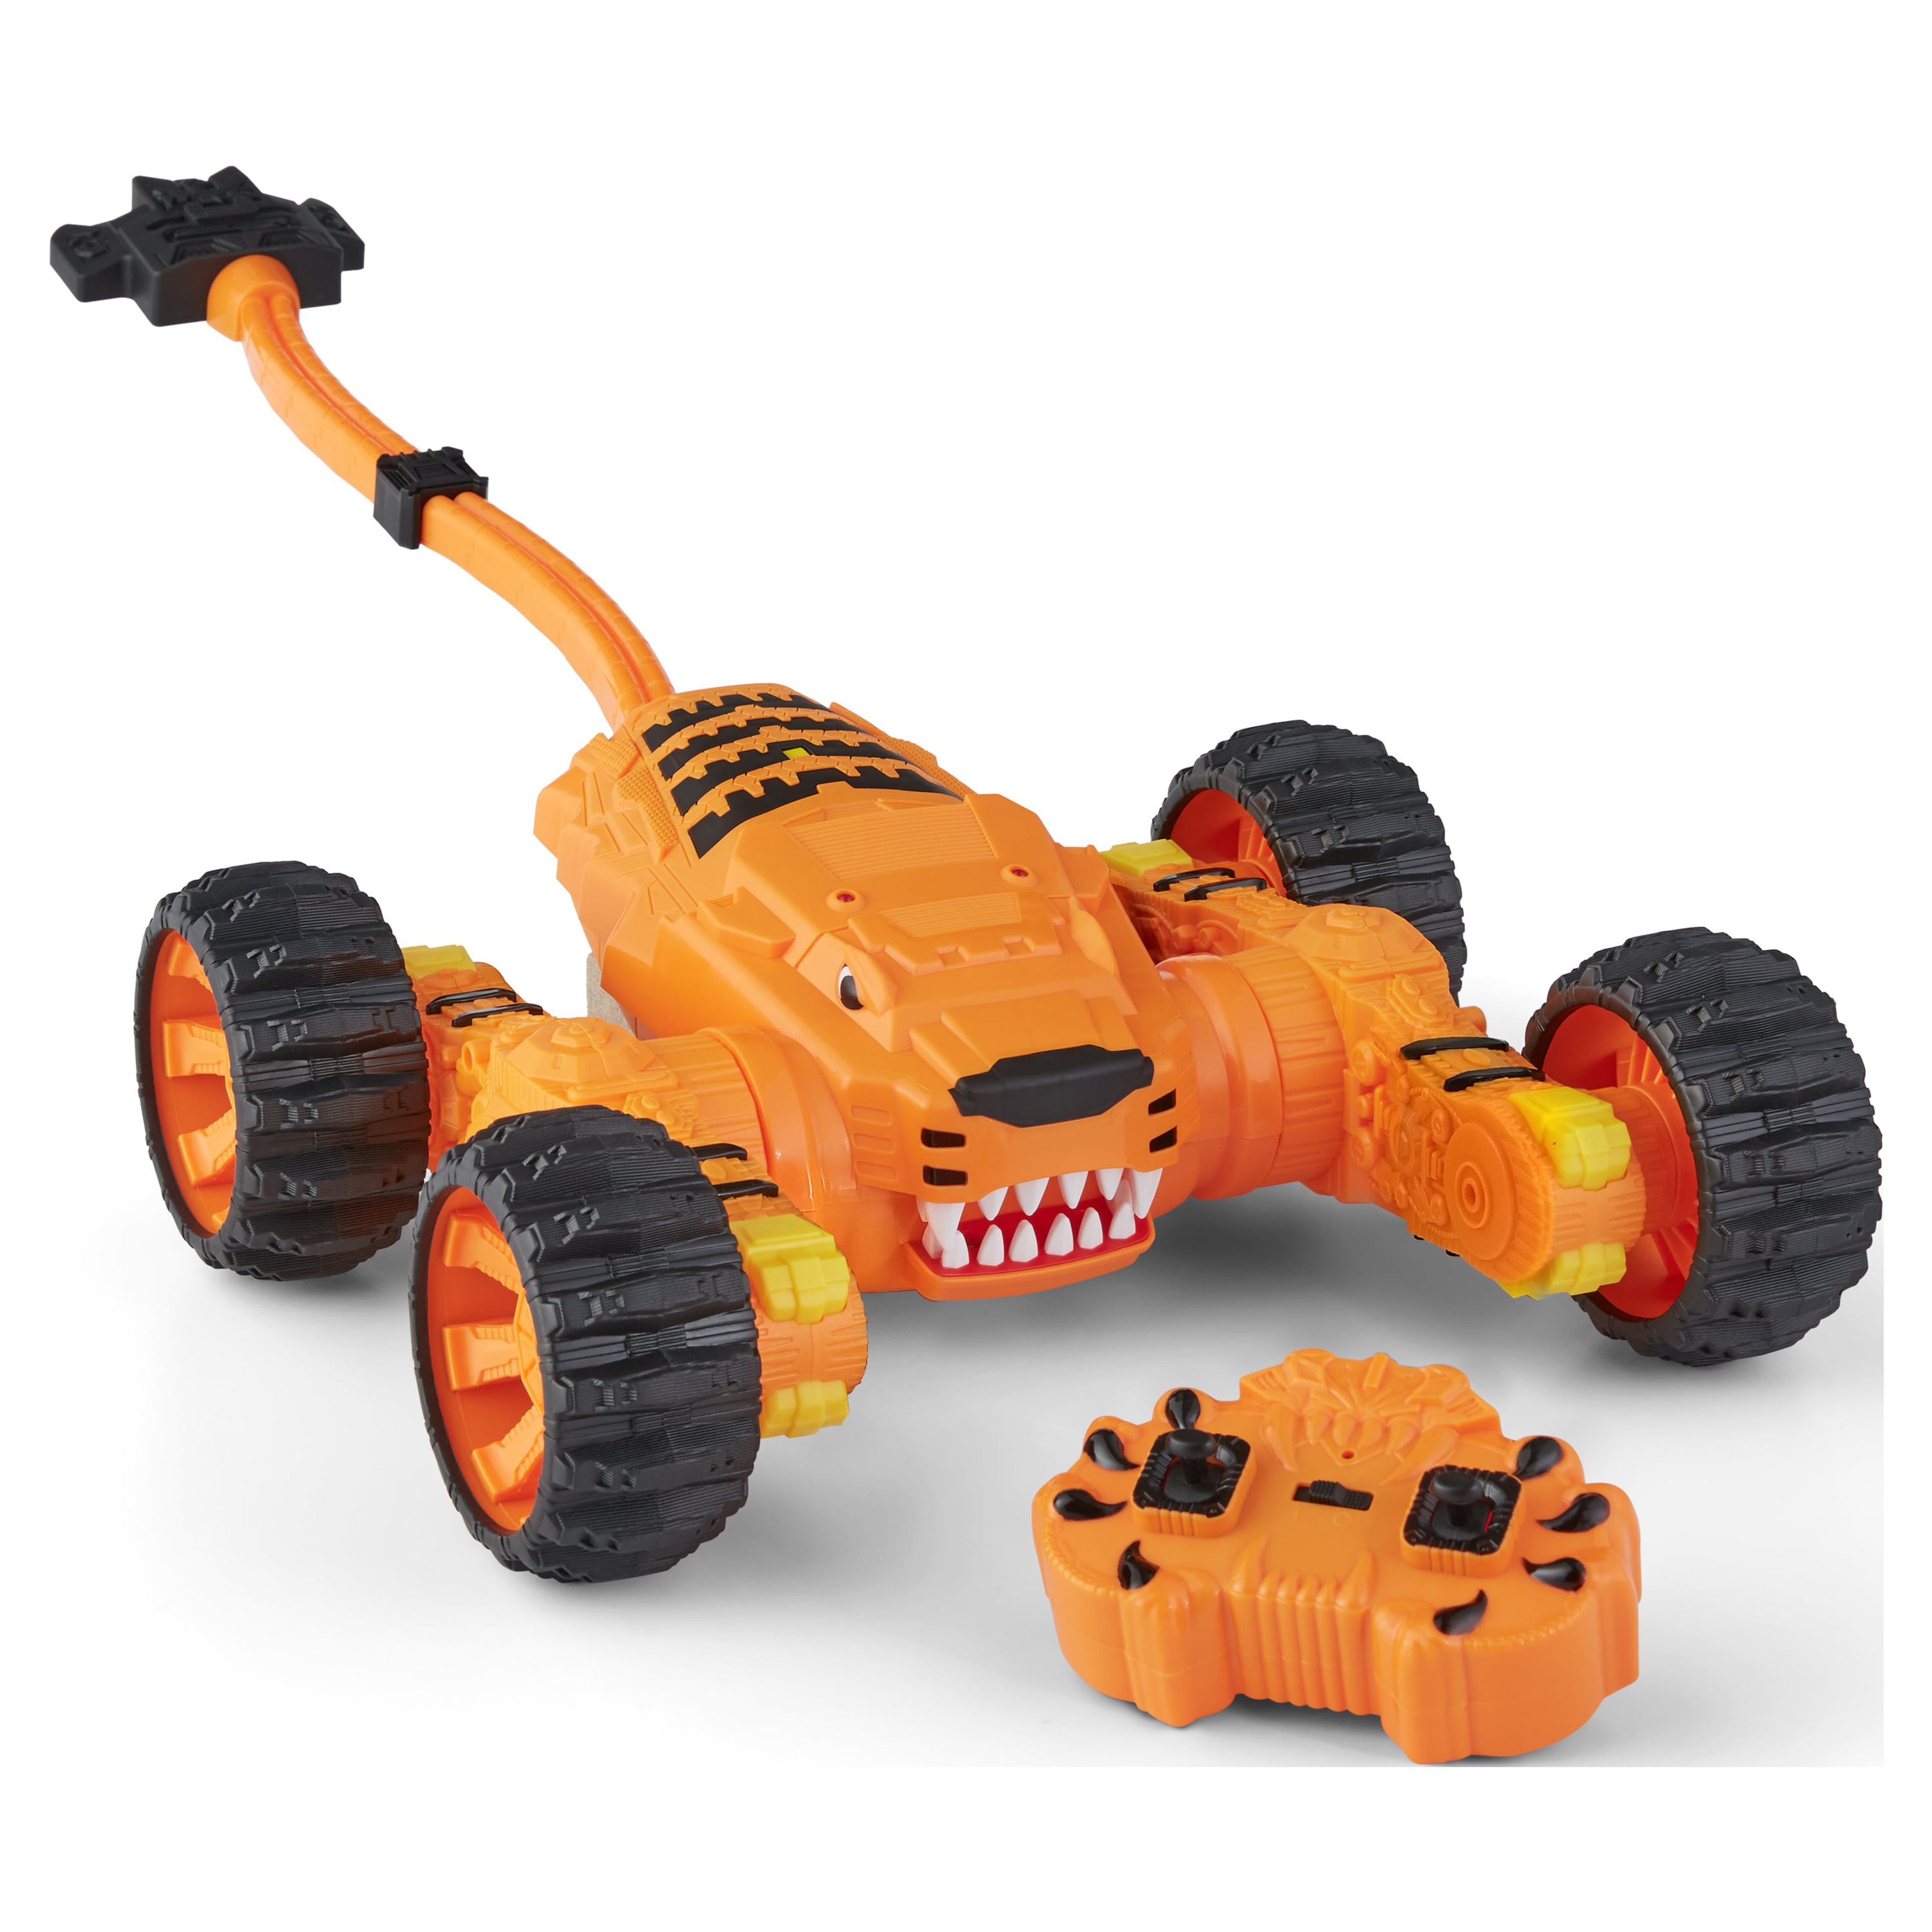 Adventure Force Tiger Twister Radio Controlled Stunt Vehicle - image 3 of 6